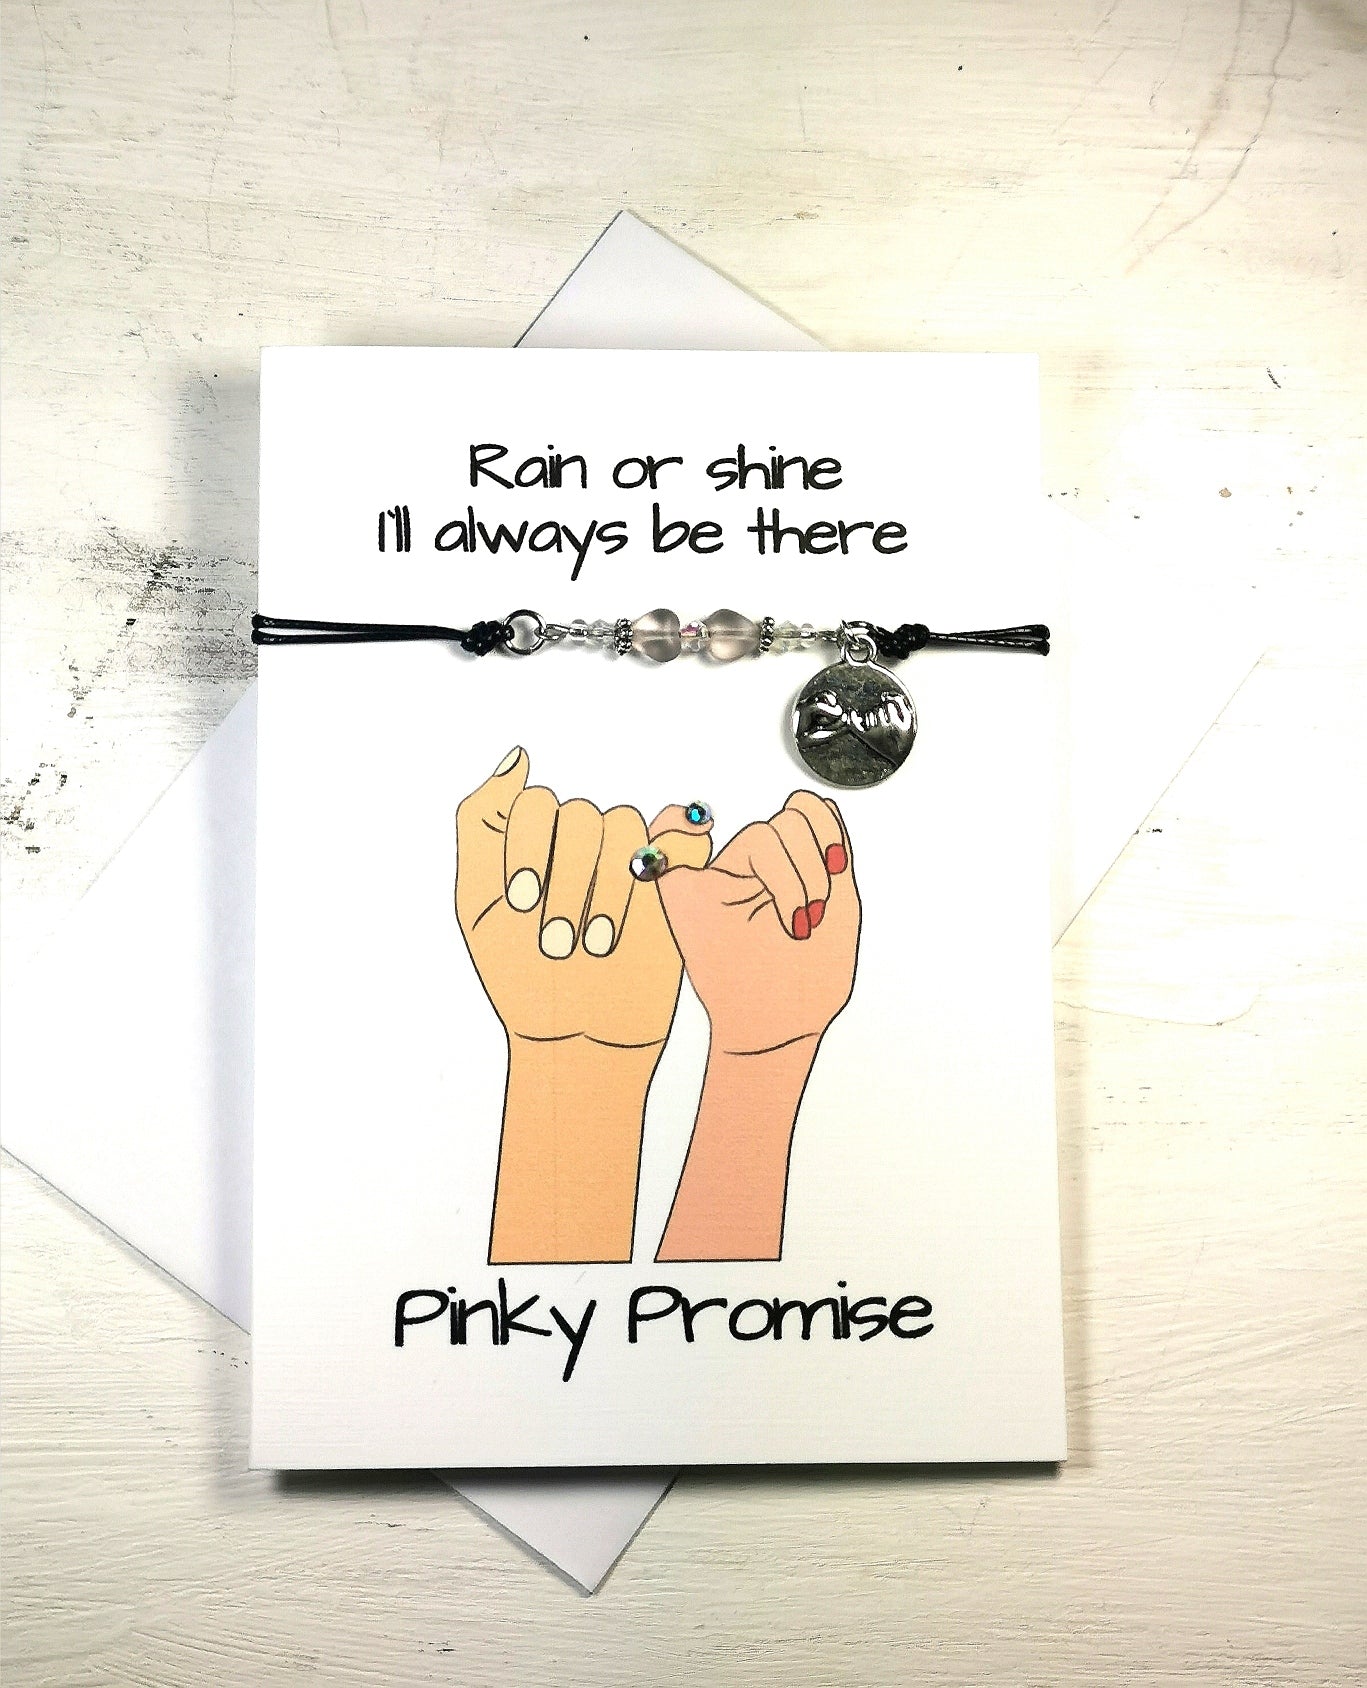 Friendship Bracelet gift Card | Best Friend  Pinky Promise Note Bracelet card | With you in good times and Bad rain or shine Friendship heart bracelet